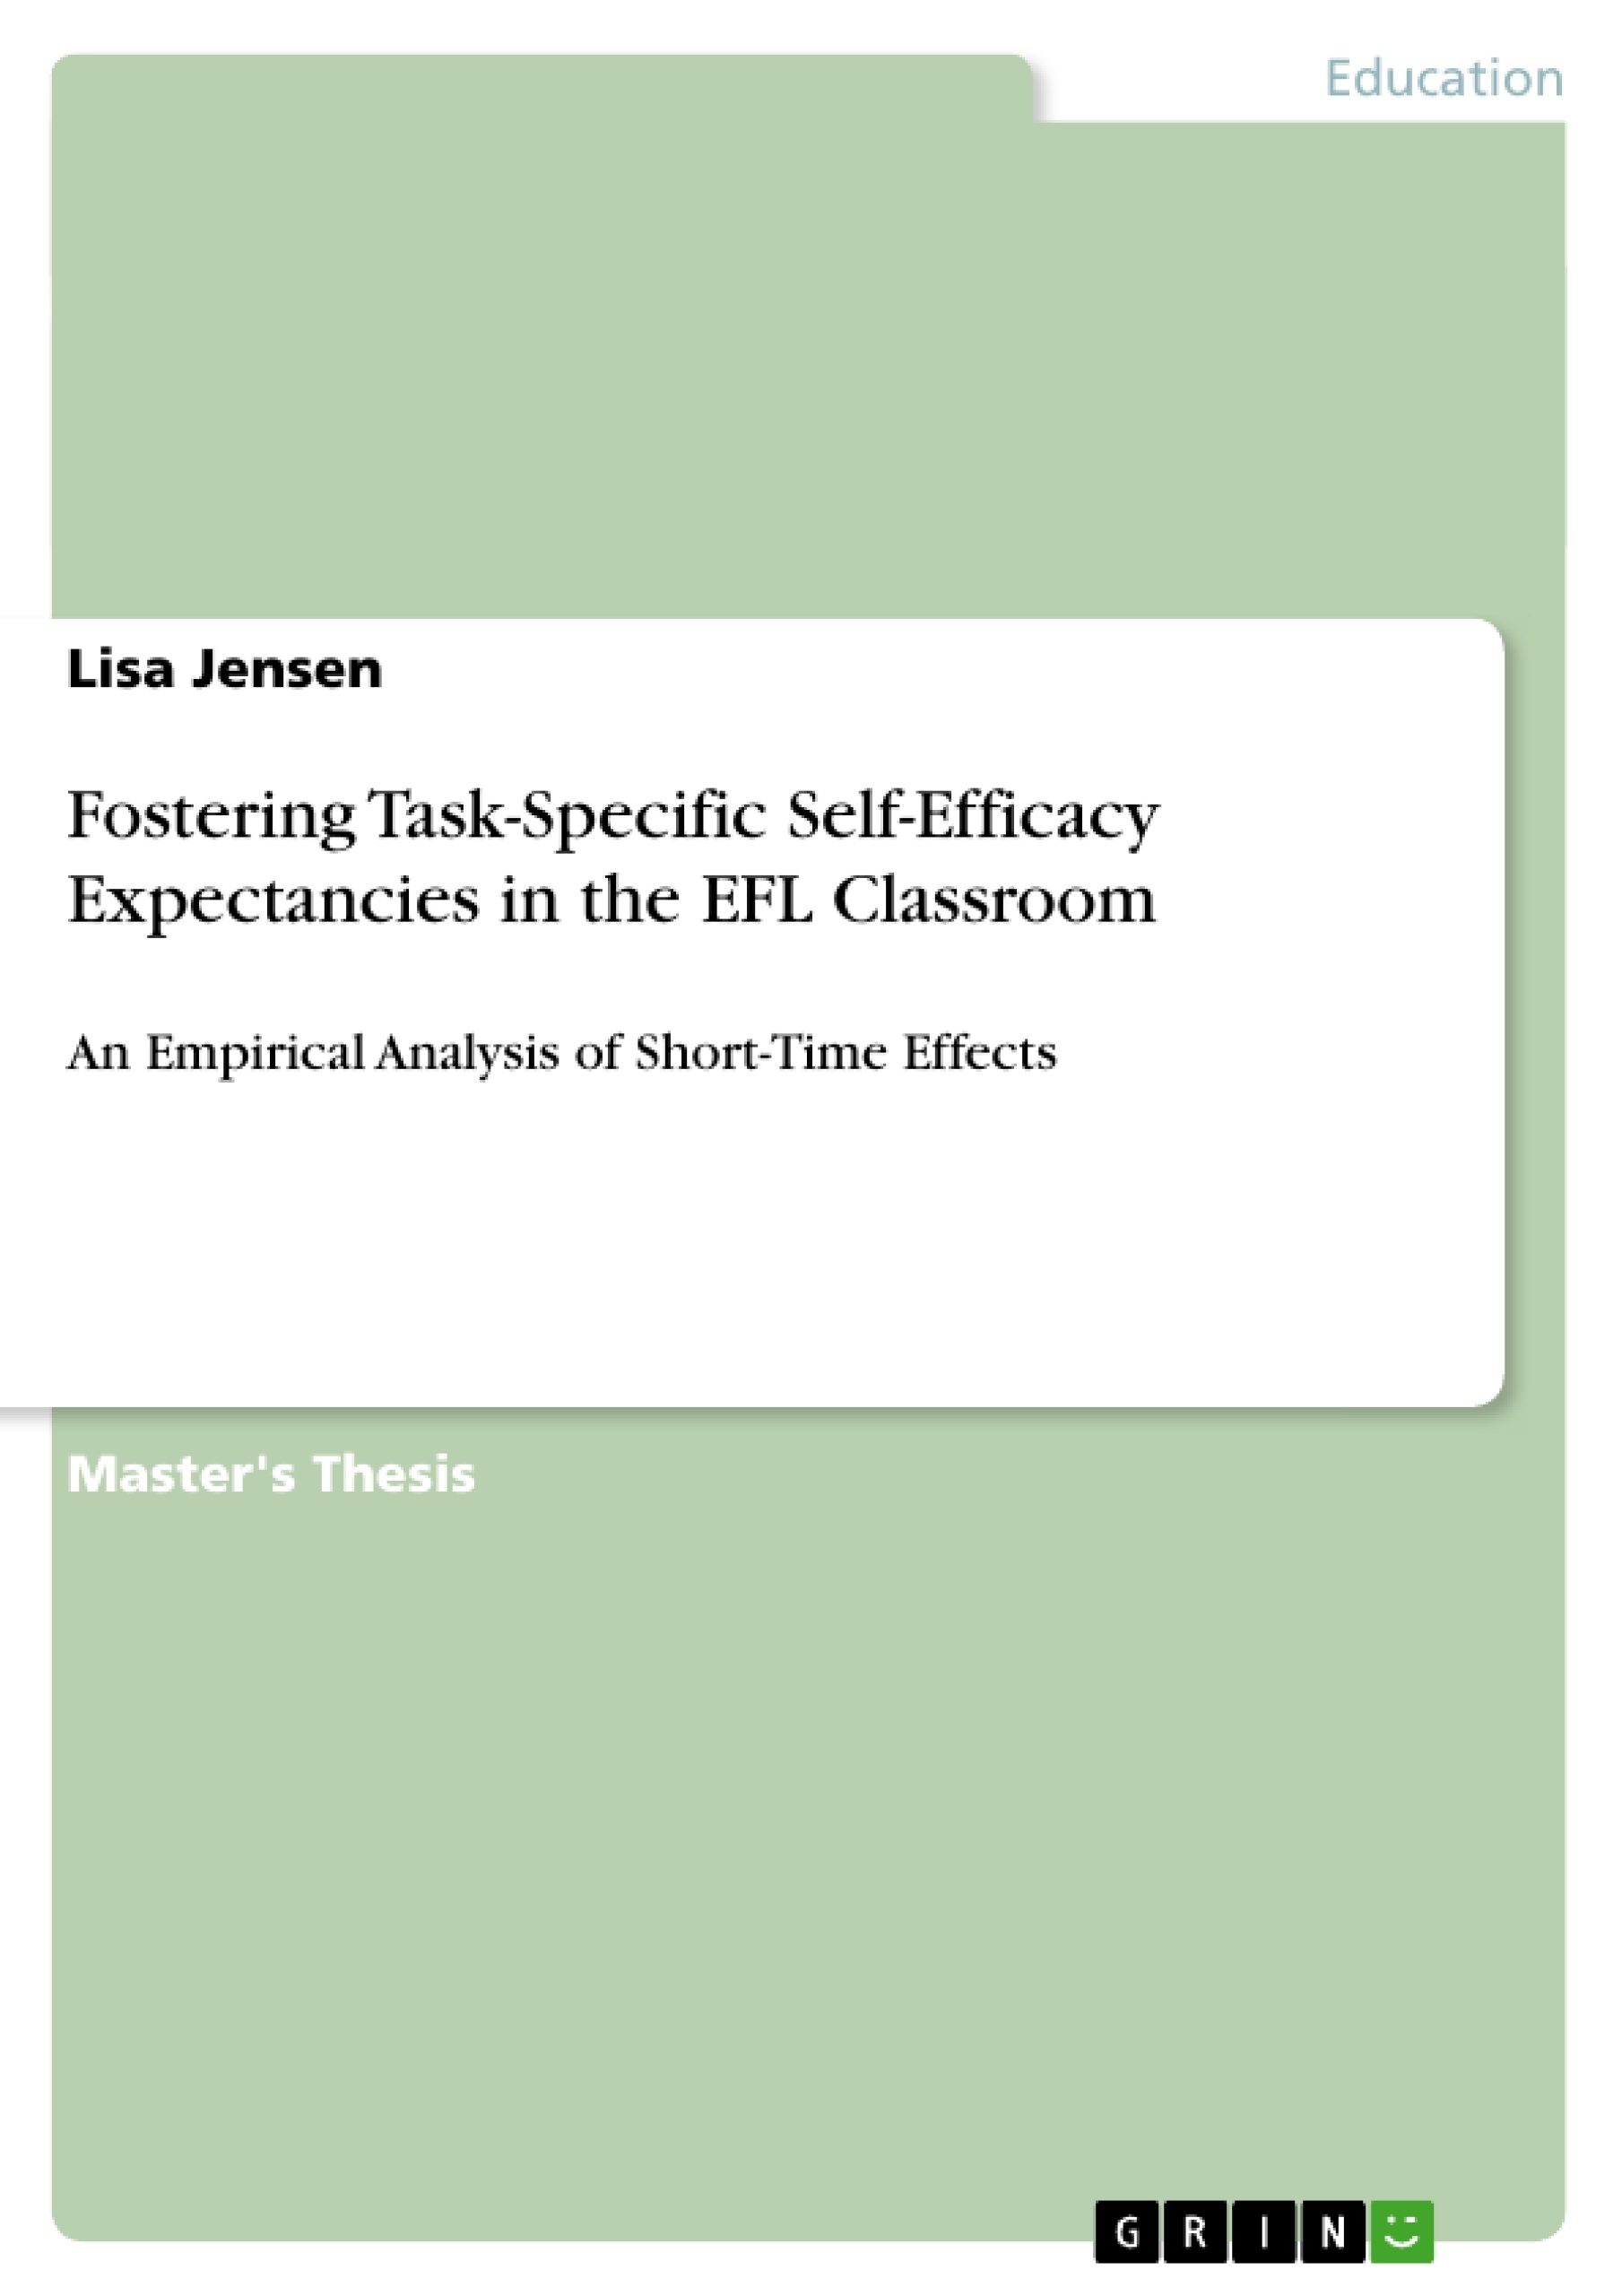 Title: Fostering Task-Specific Self-Efficacy Expectancies in the EFL Classroom